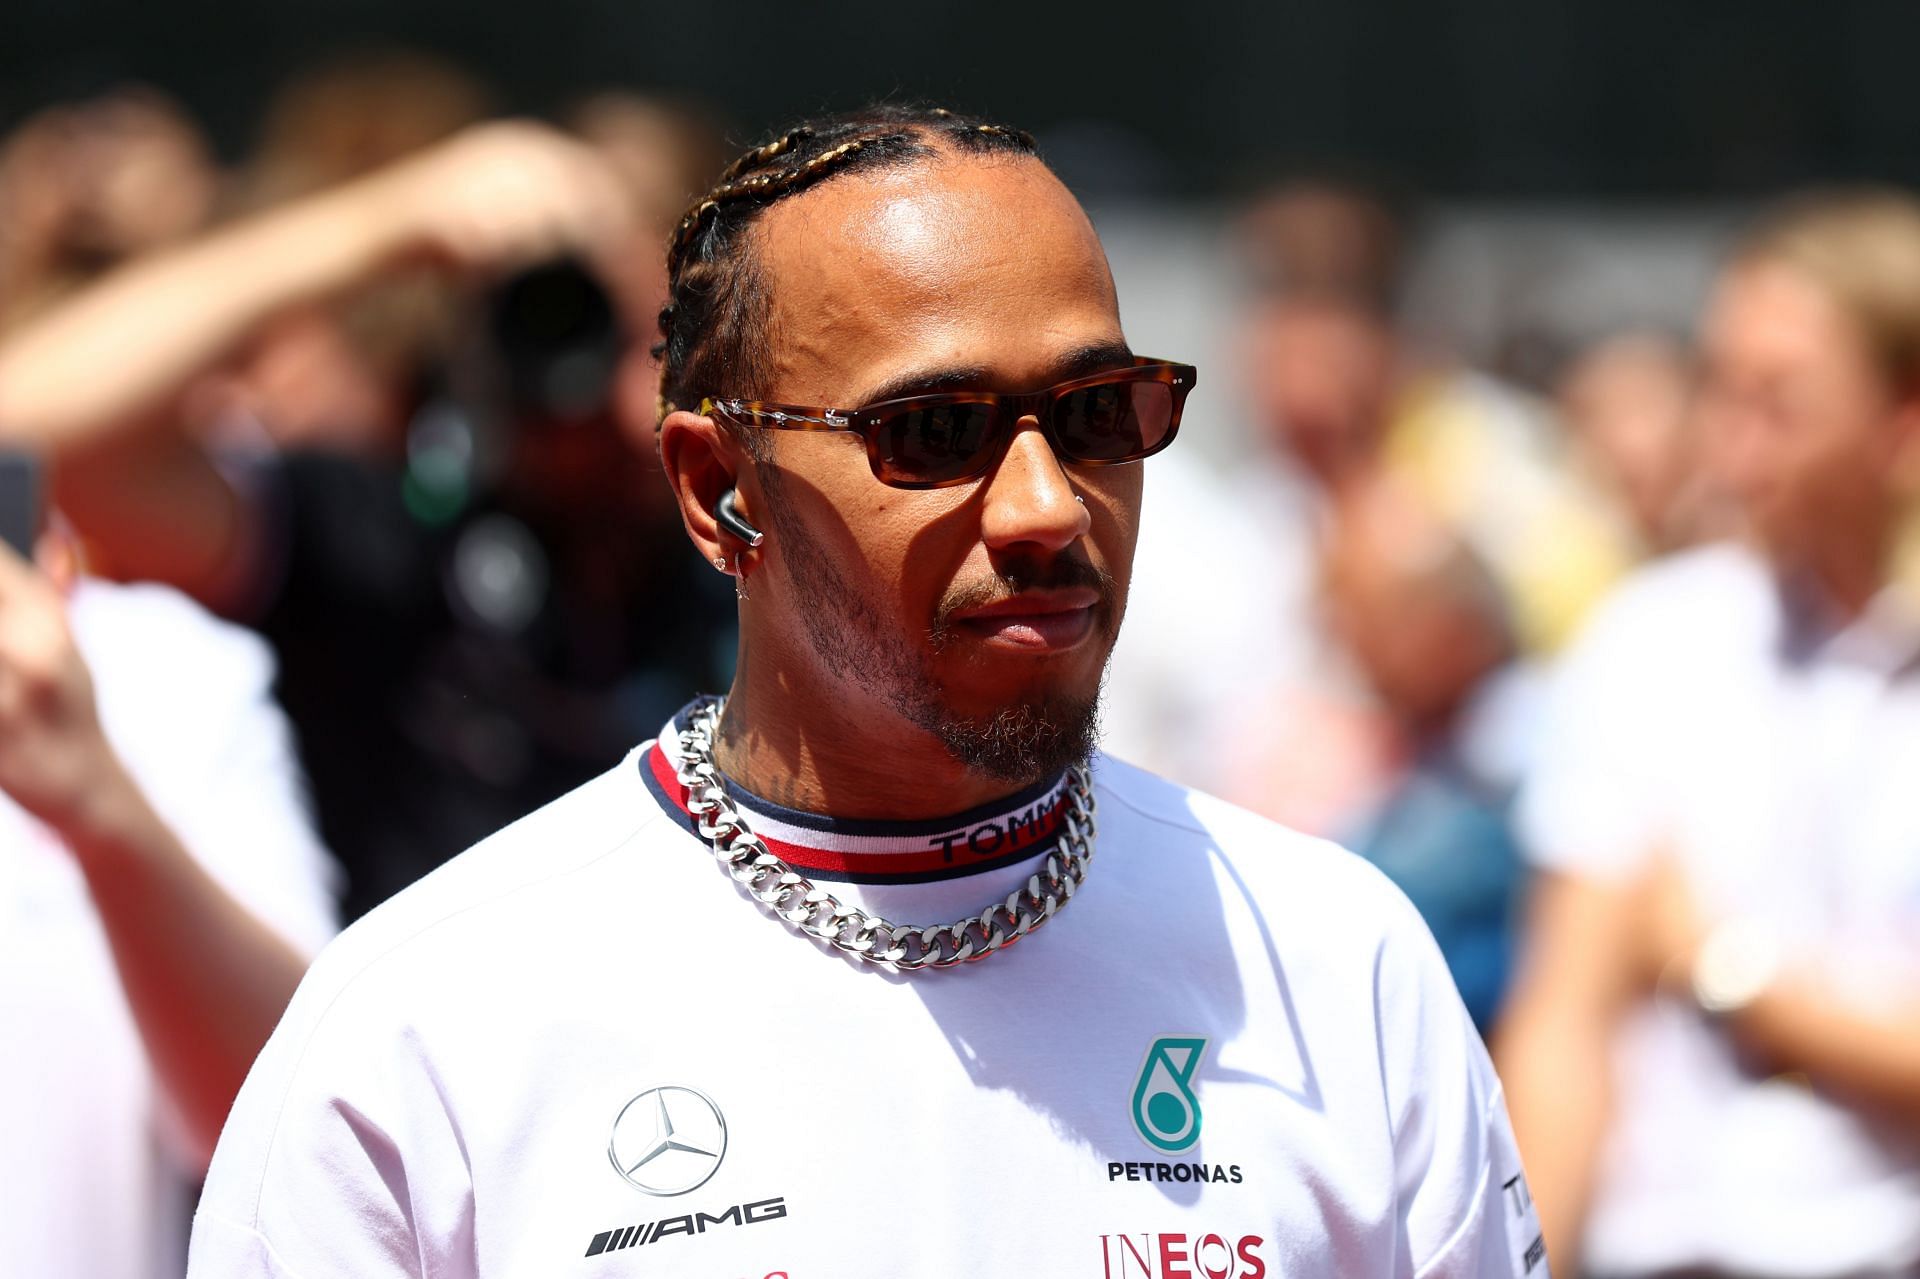 Lewis Hamilton had a rather up and down race in Barcelona